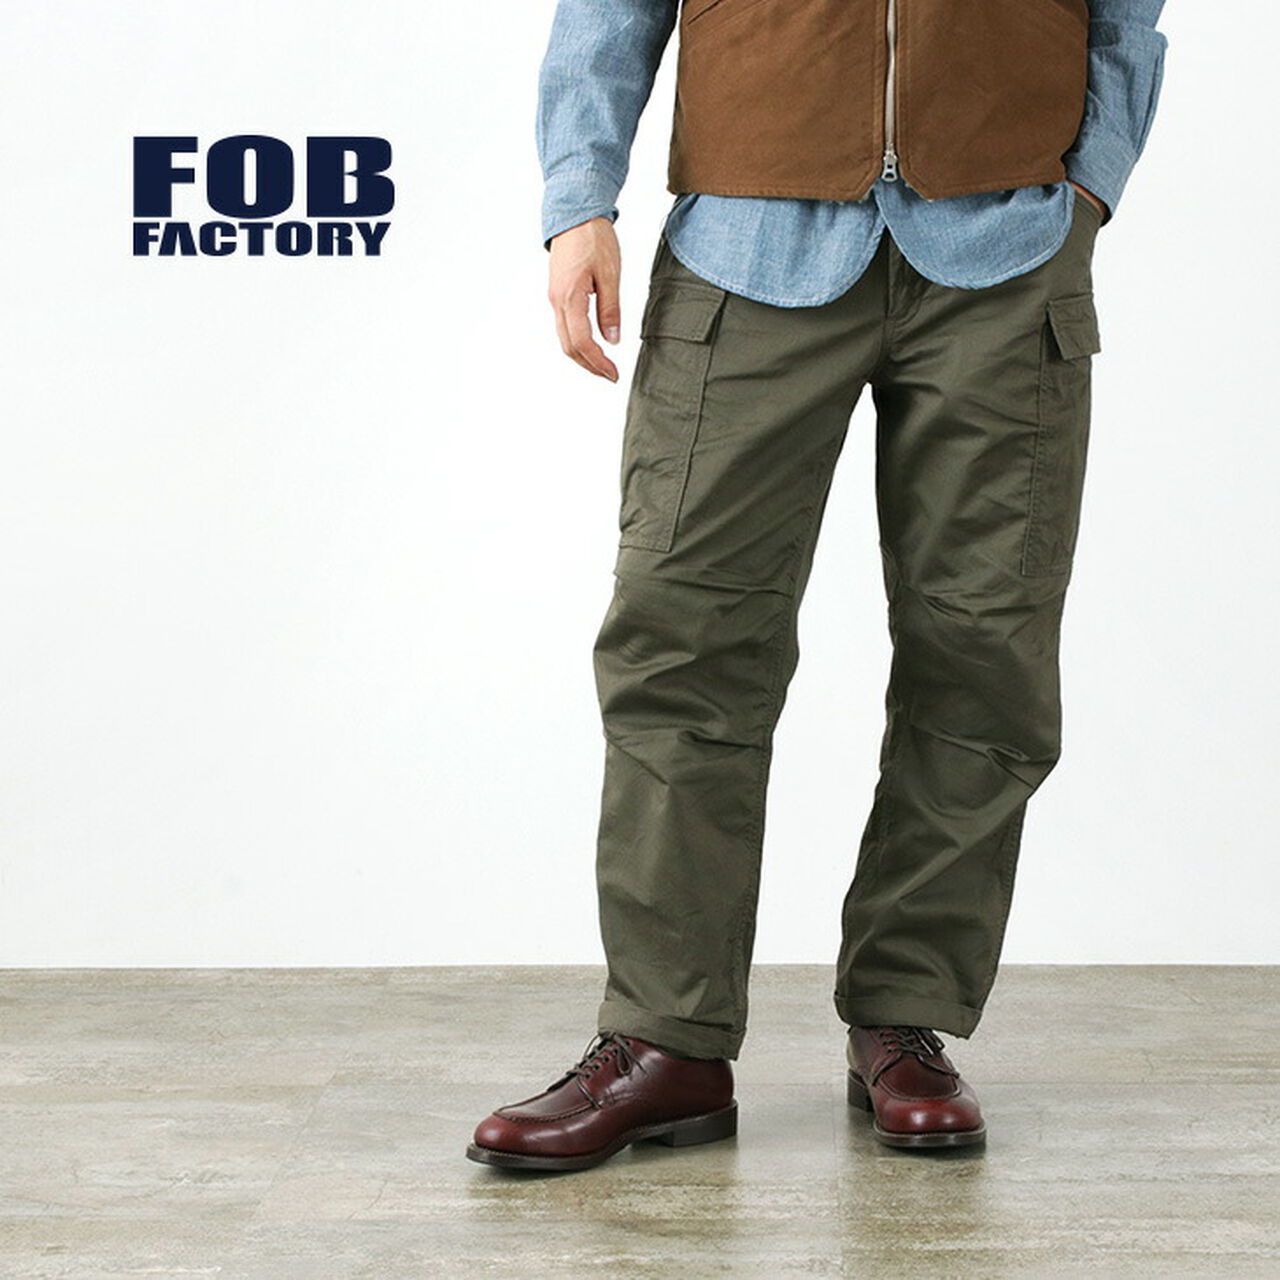 FOB FACTORY F0503 cargo trousers